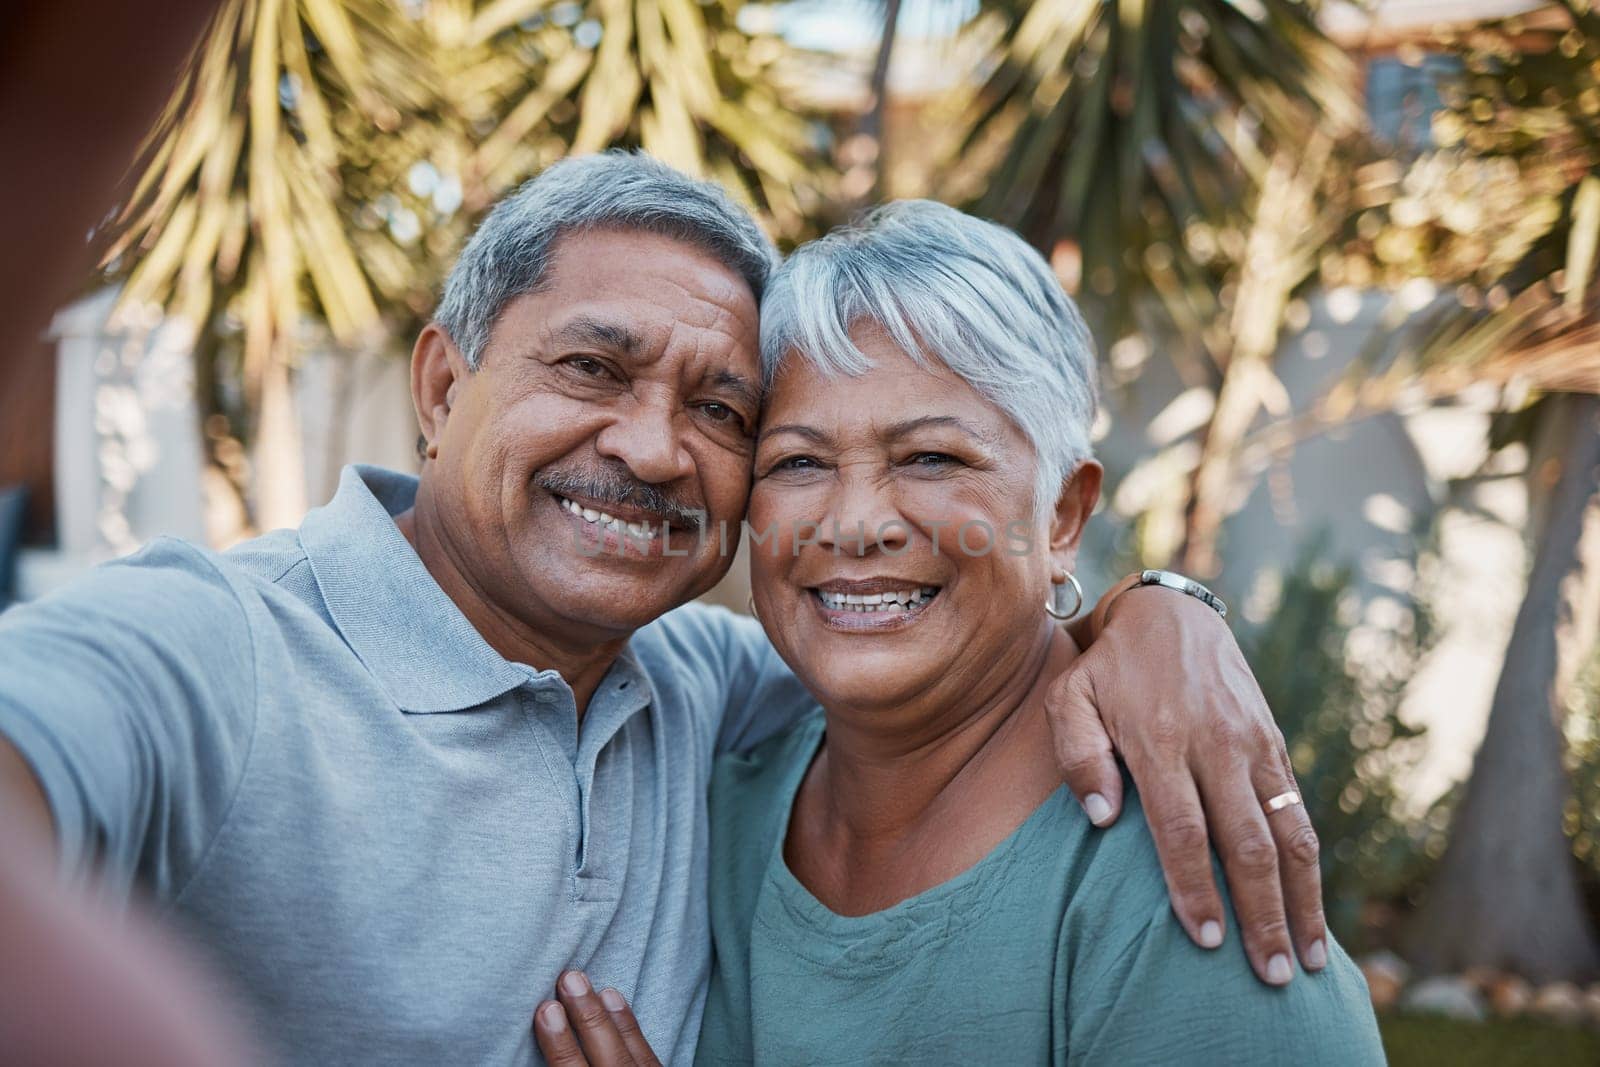 Senior couple, hug and smile for selfie, social media or profile picture together for romance in the back yard. Portrait of happy elderly man and woman smiling in happiness for photo or relationship.